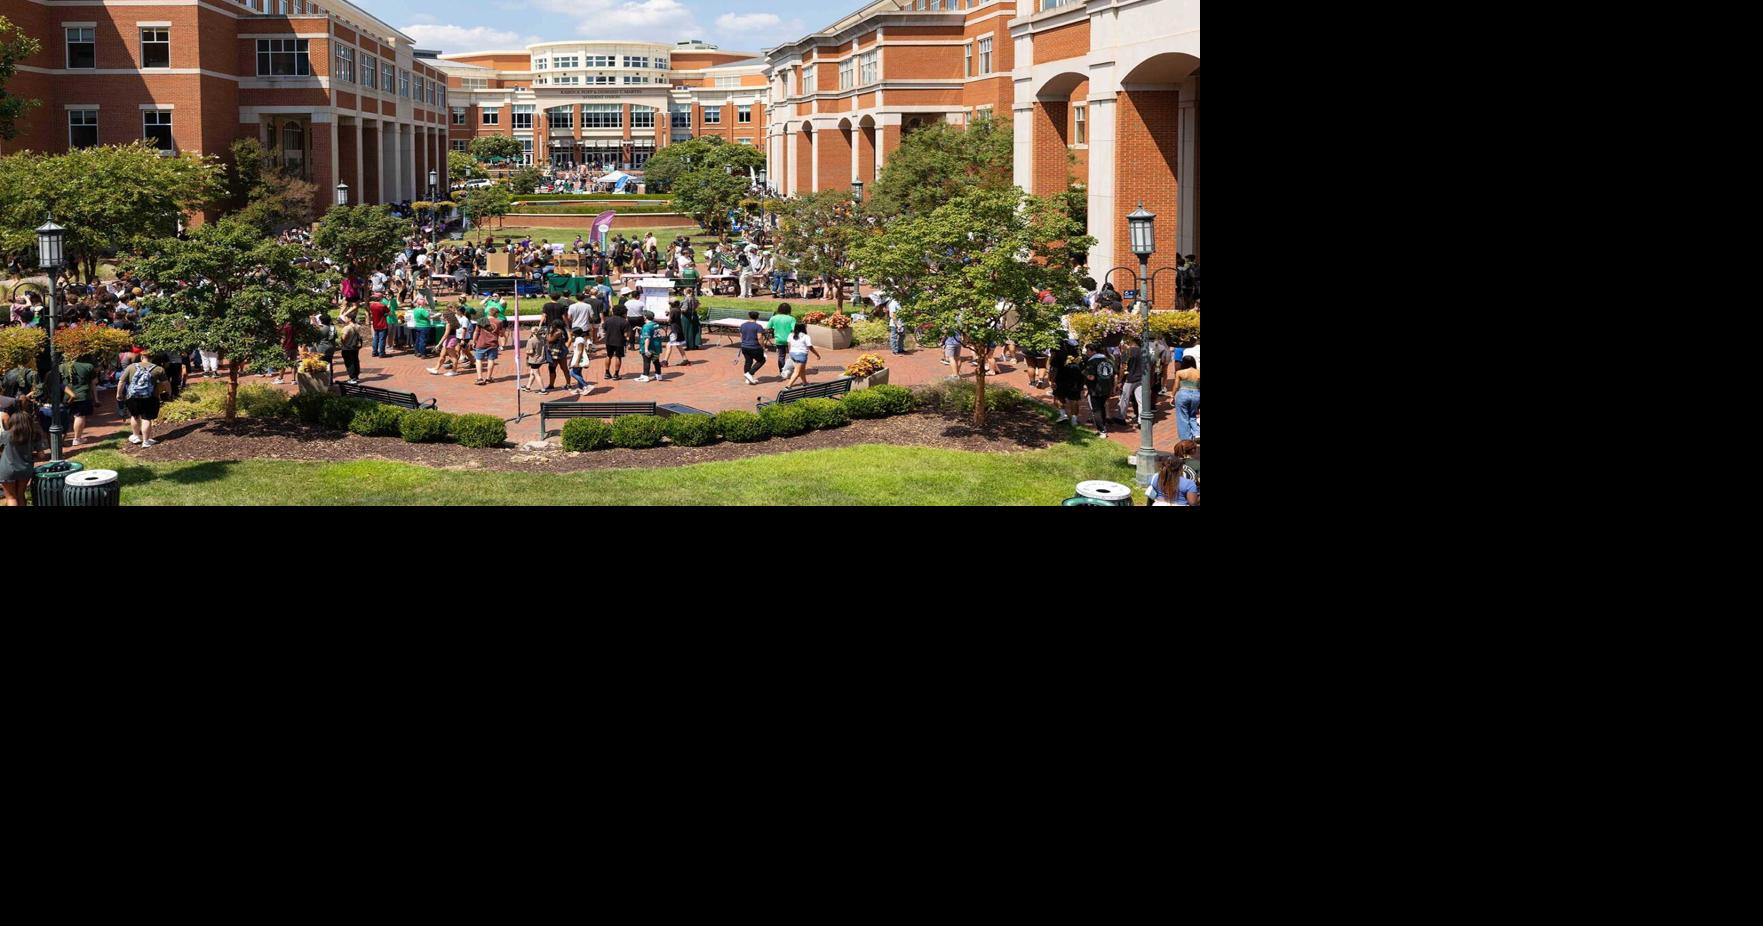 RULES FOR UNC CHARLOTTE'S HOMECOMING 2021 